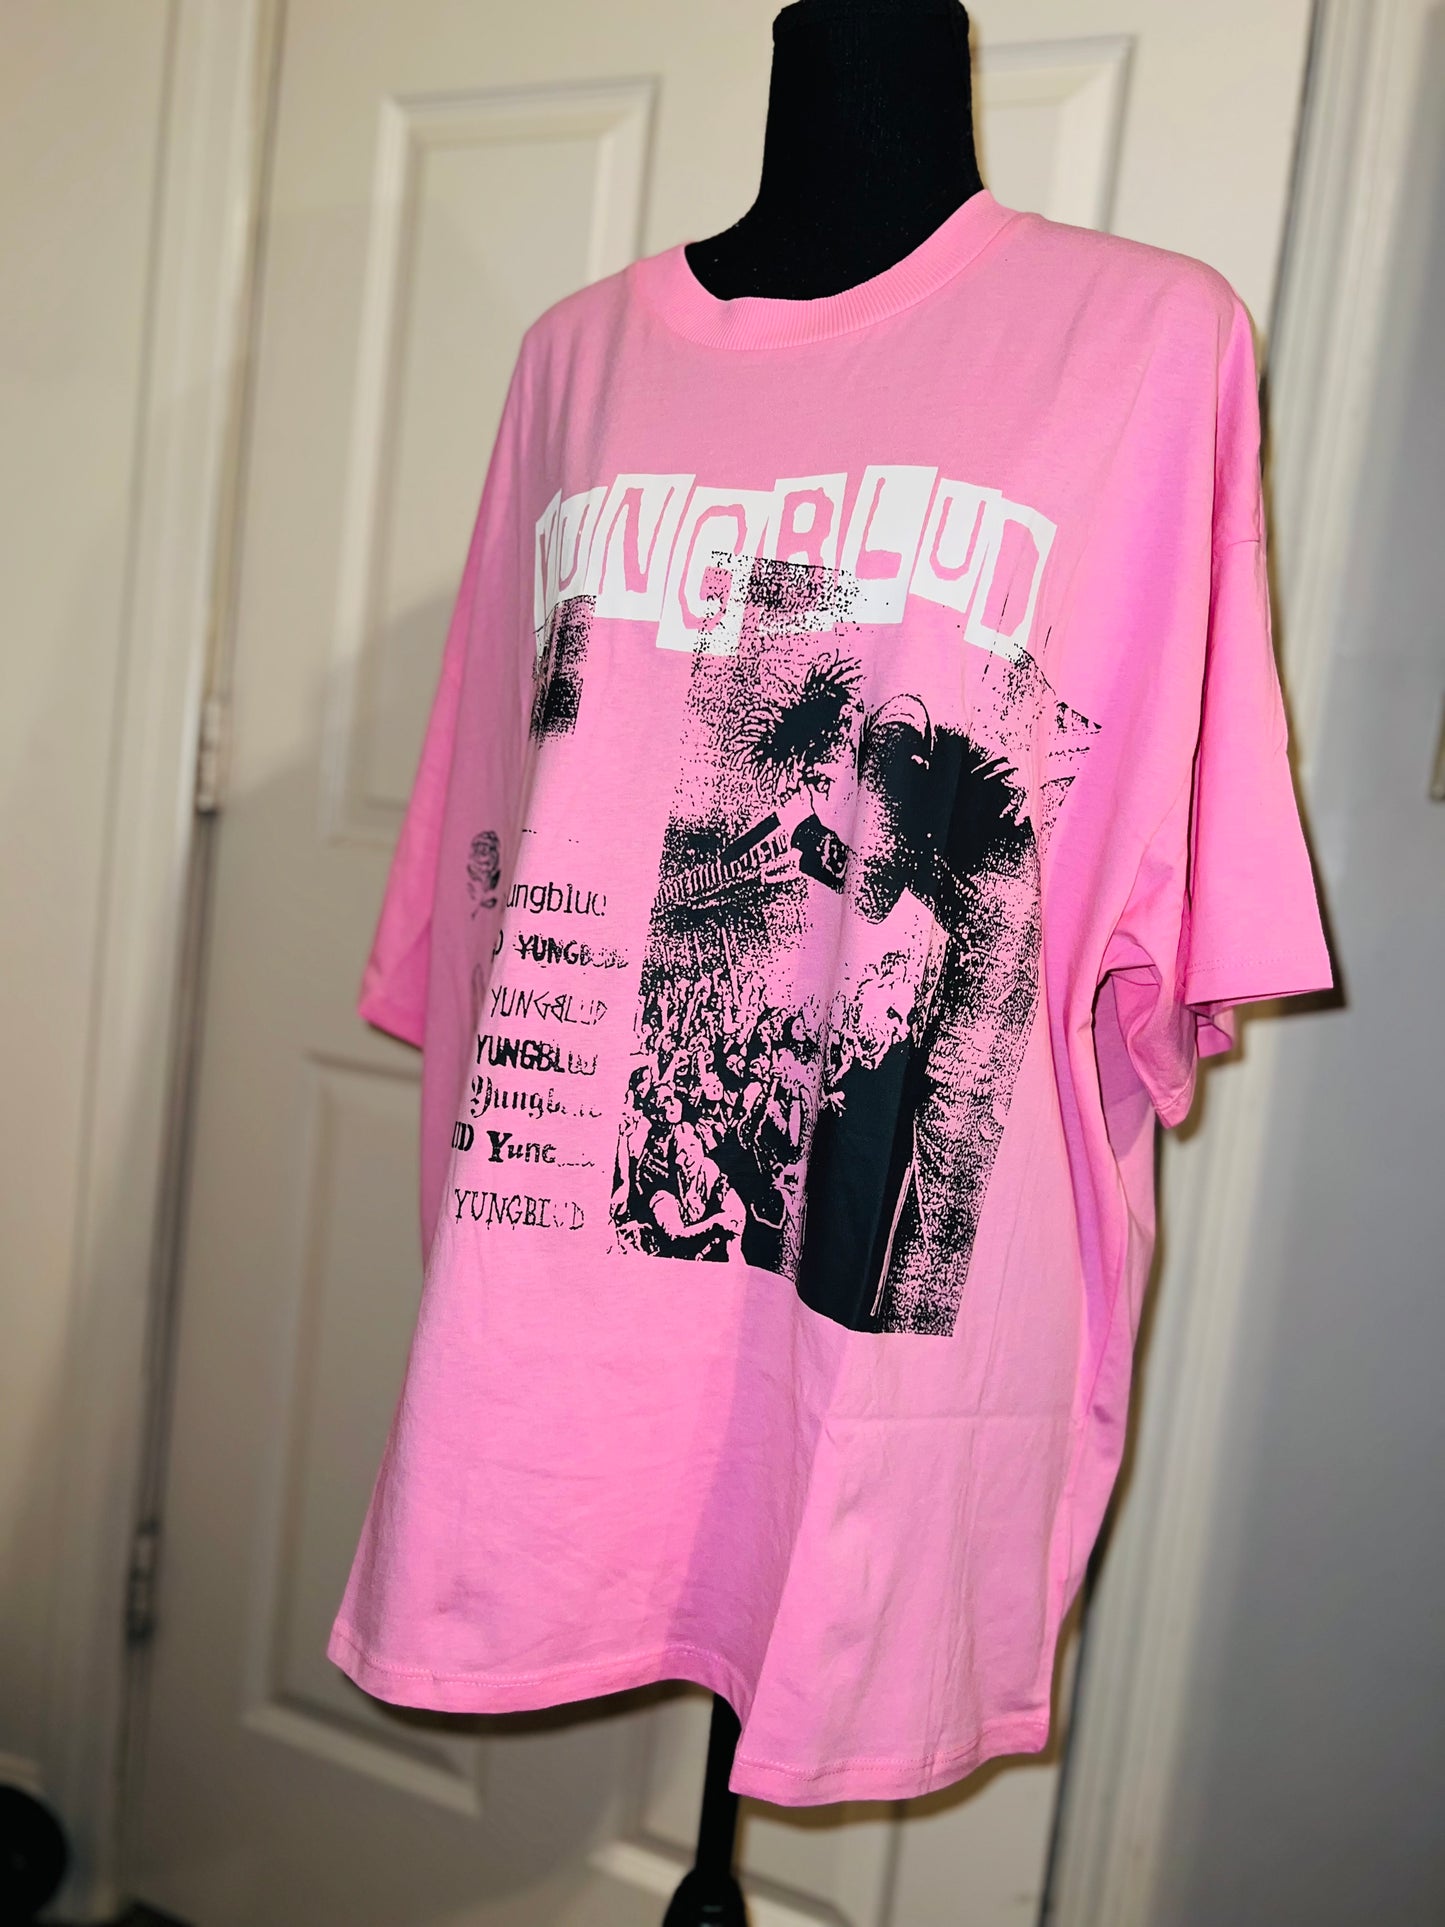 Yungblud Oversized Distressed Tee